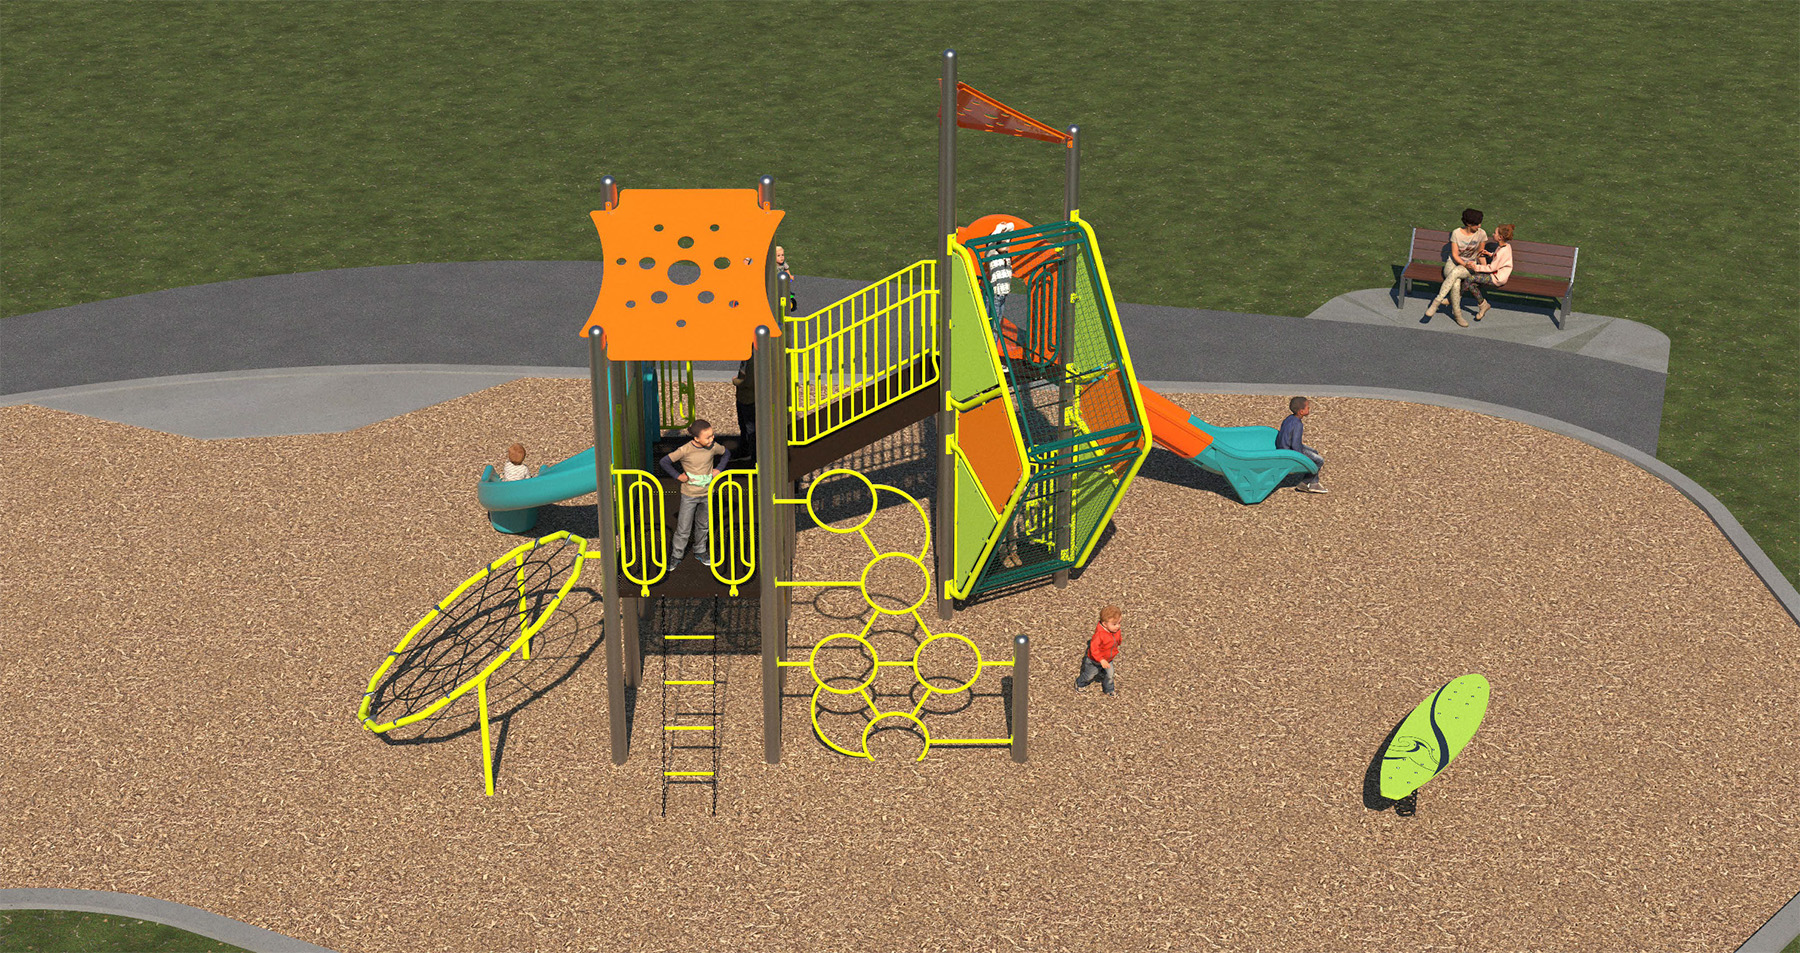 An aerial view of the final design for the new Heathrow Park Playground, which has been refined based on community feedback. An extra bench has been provided and can be seen beside the new play equipment. The playground will be lime green, silver, orange and teal, and include the play features listed following the image(s)